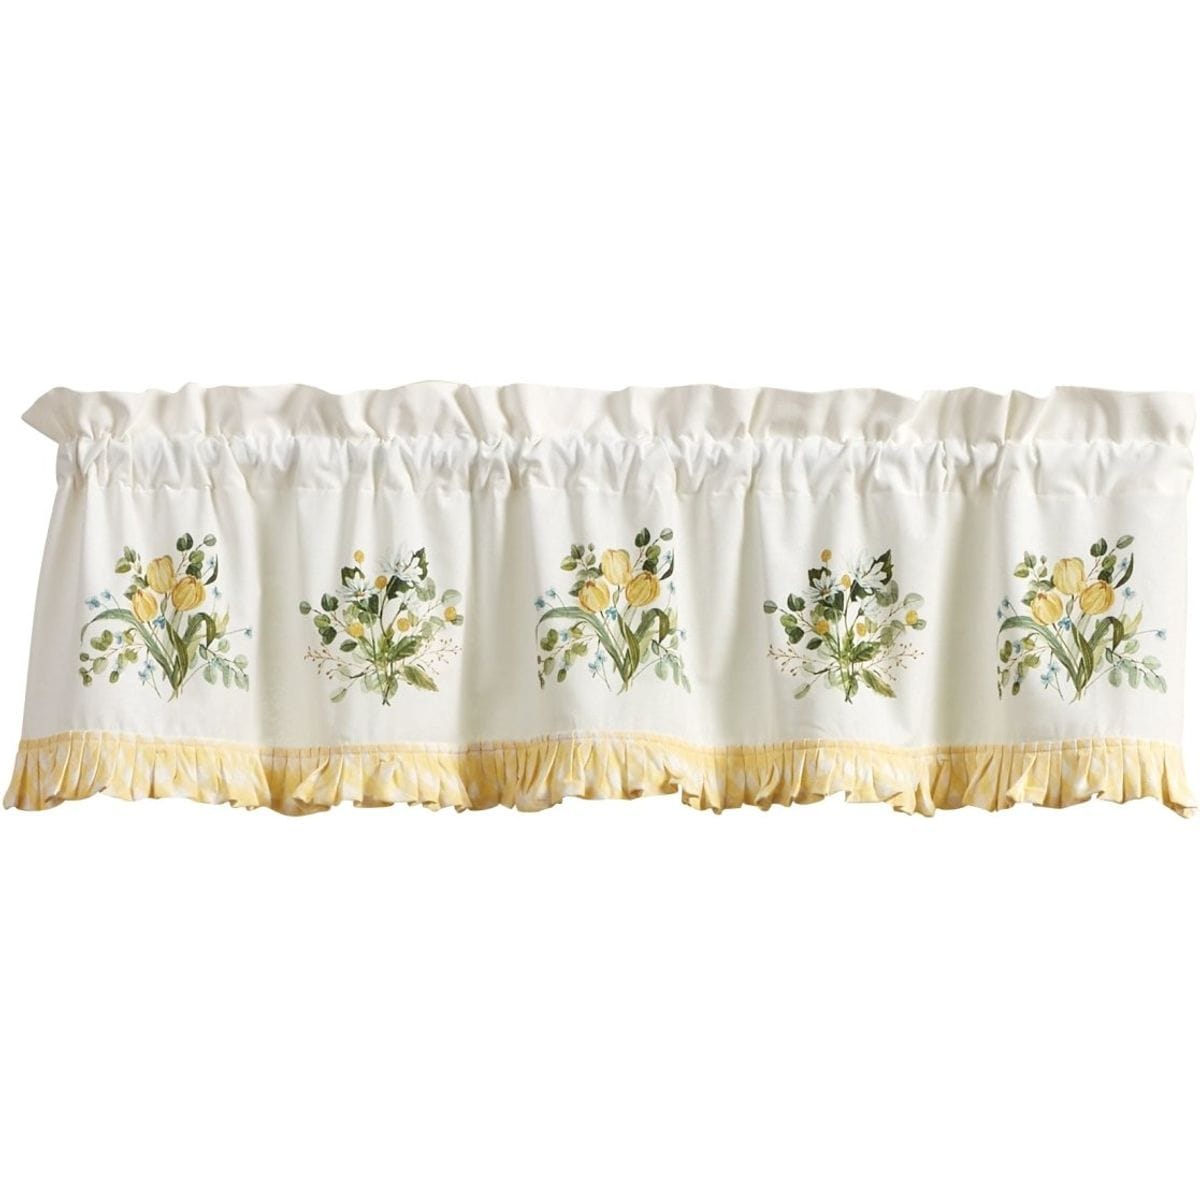 Forever Spring Ruffled Valance Unlined-Park Designs-The Village Merchant